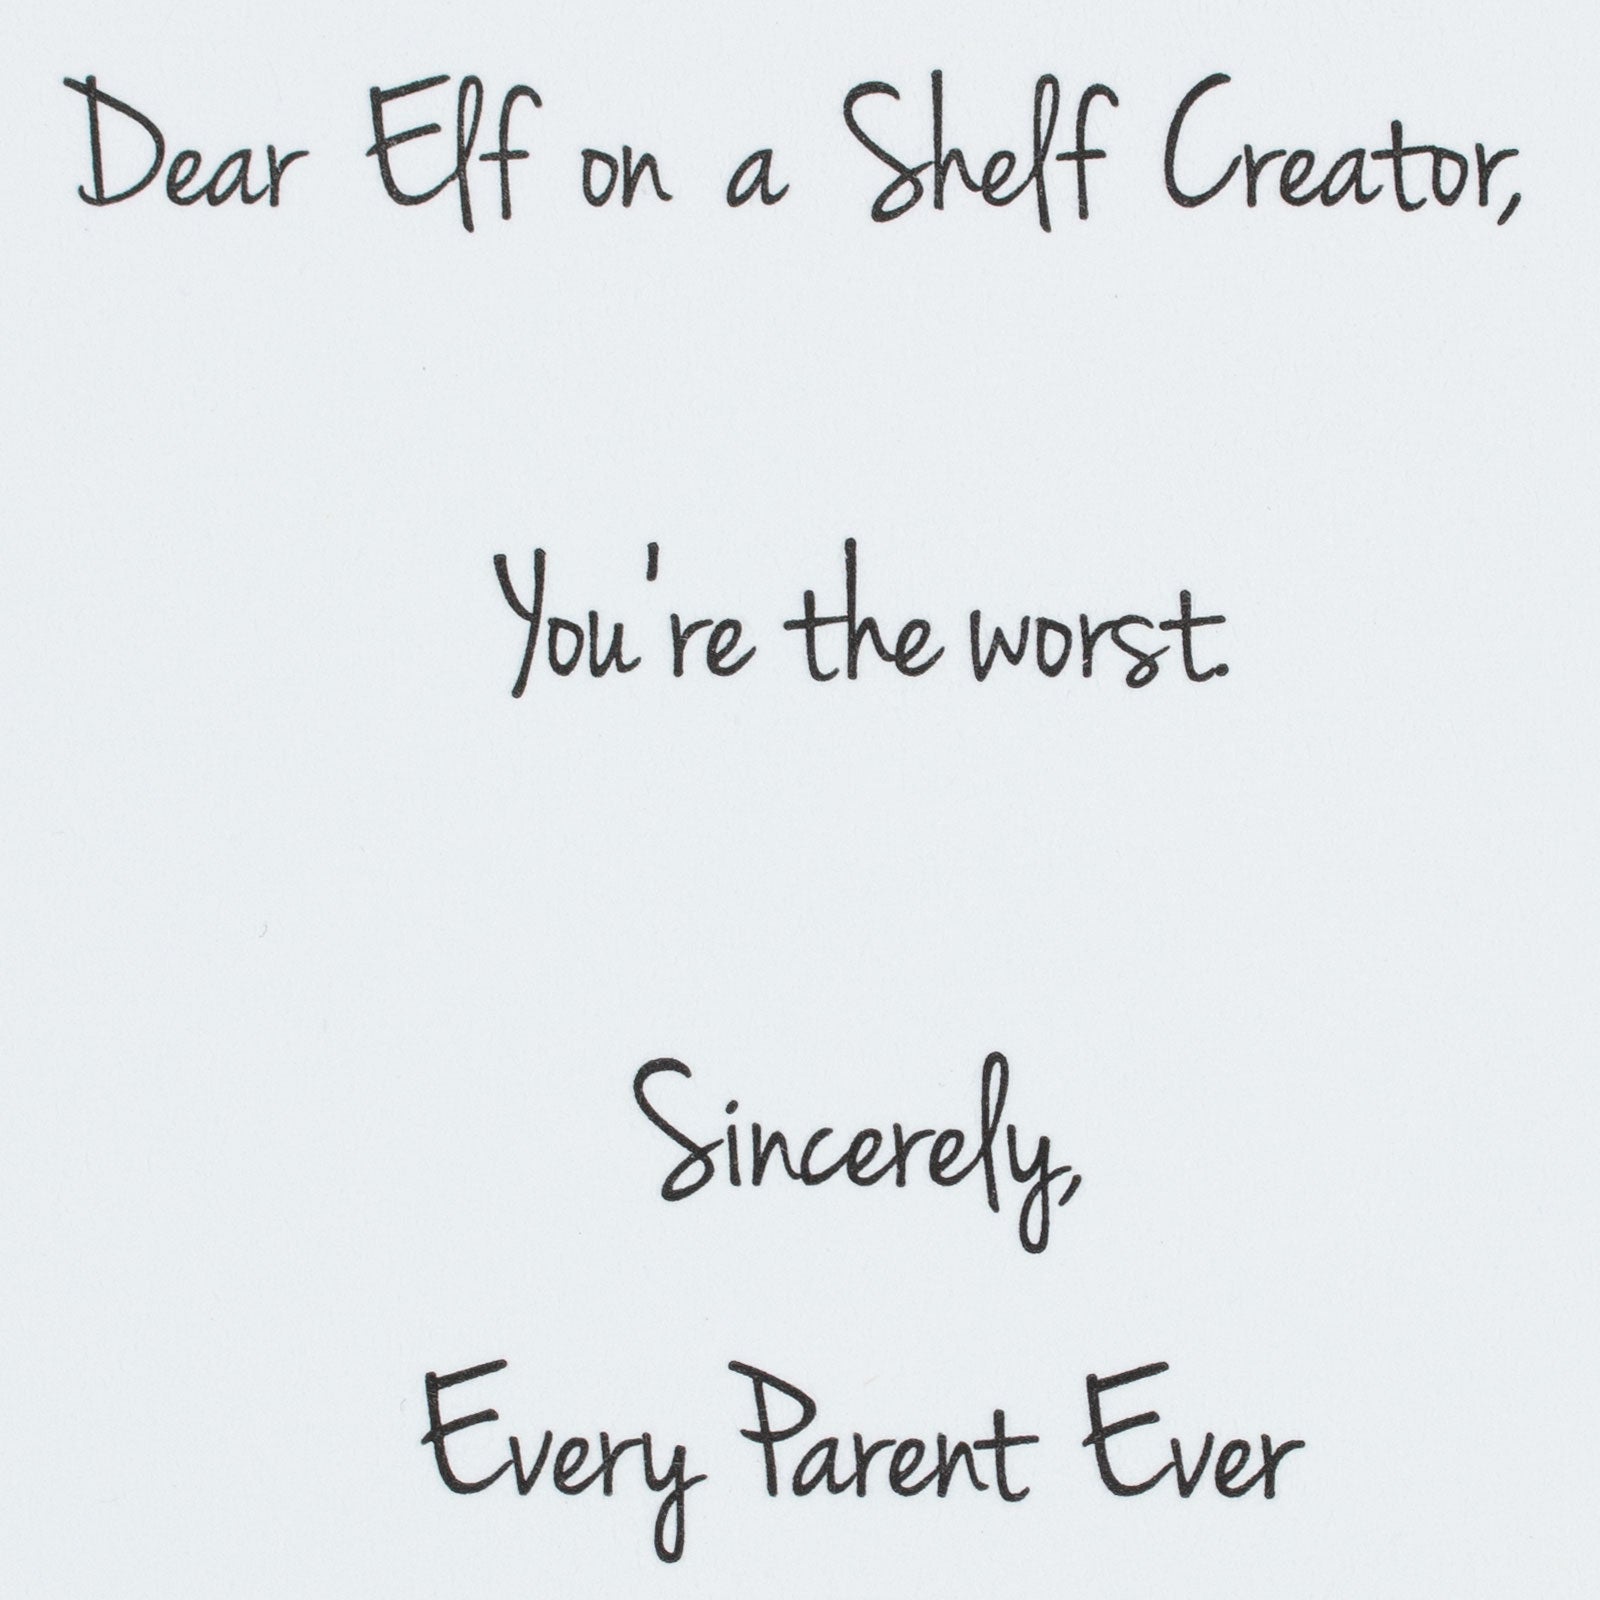 Dear Elf on a Shelf Creator, You're the worst. Sincerely, Every Parent Ever - Letterpress Card